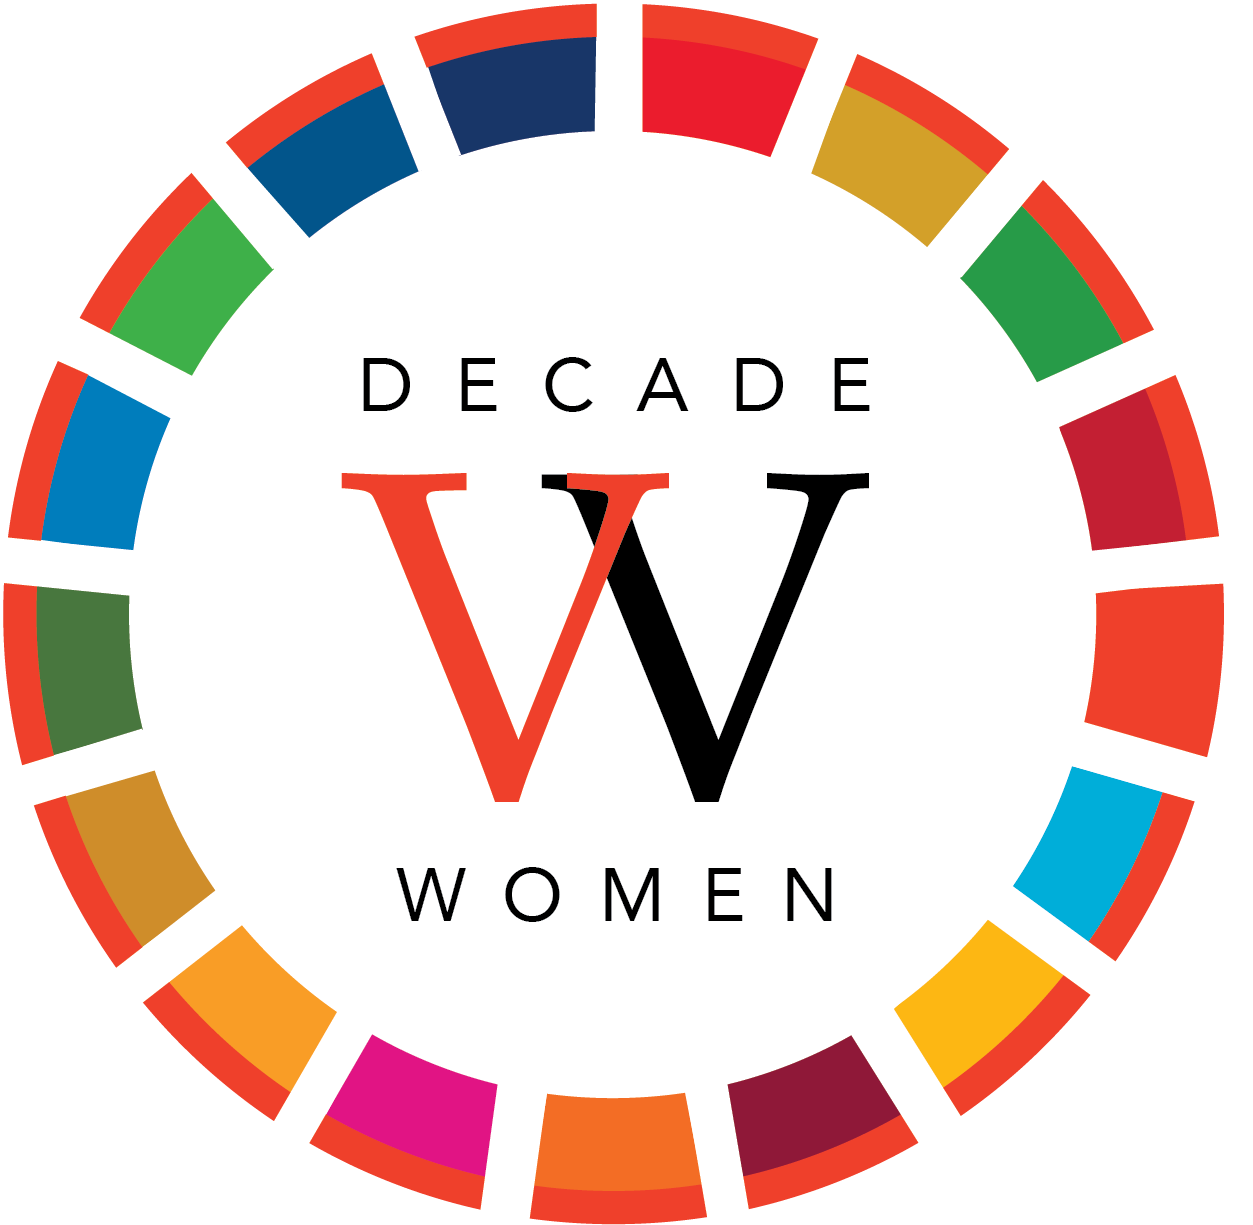 Decade Of Women Celebrate the Launch of the Year of Women Campaign